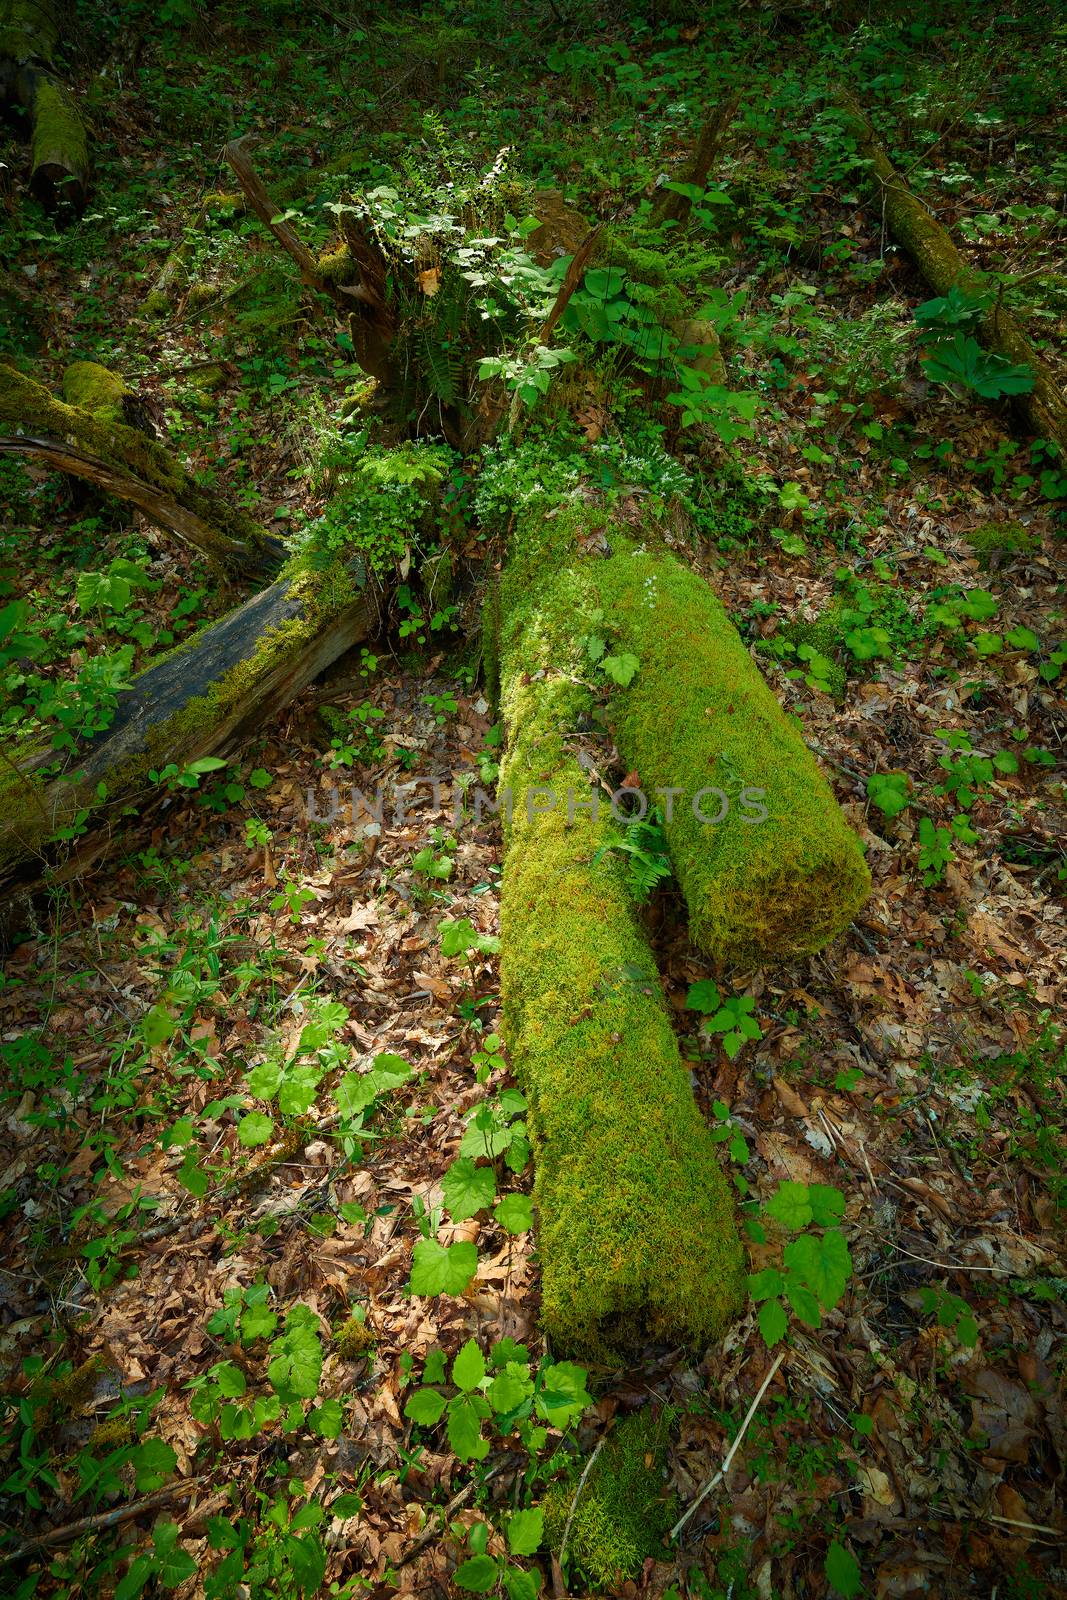 Moss covered log laying on forest floor.